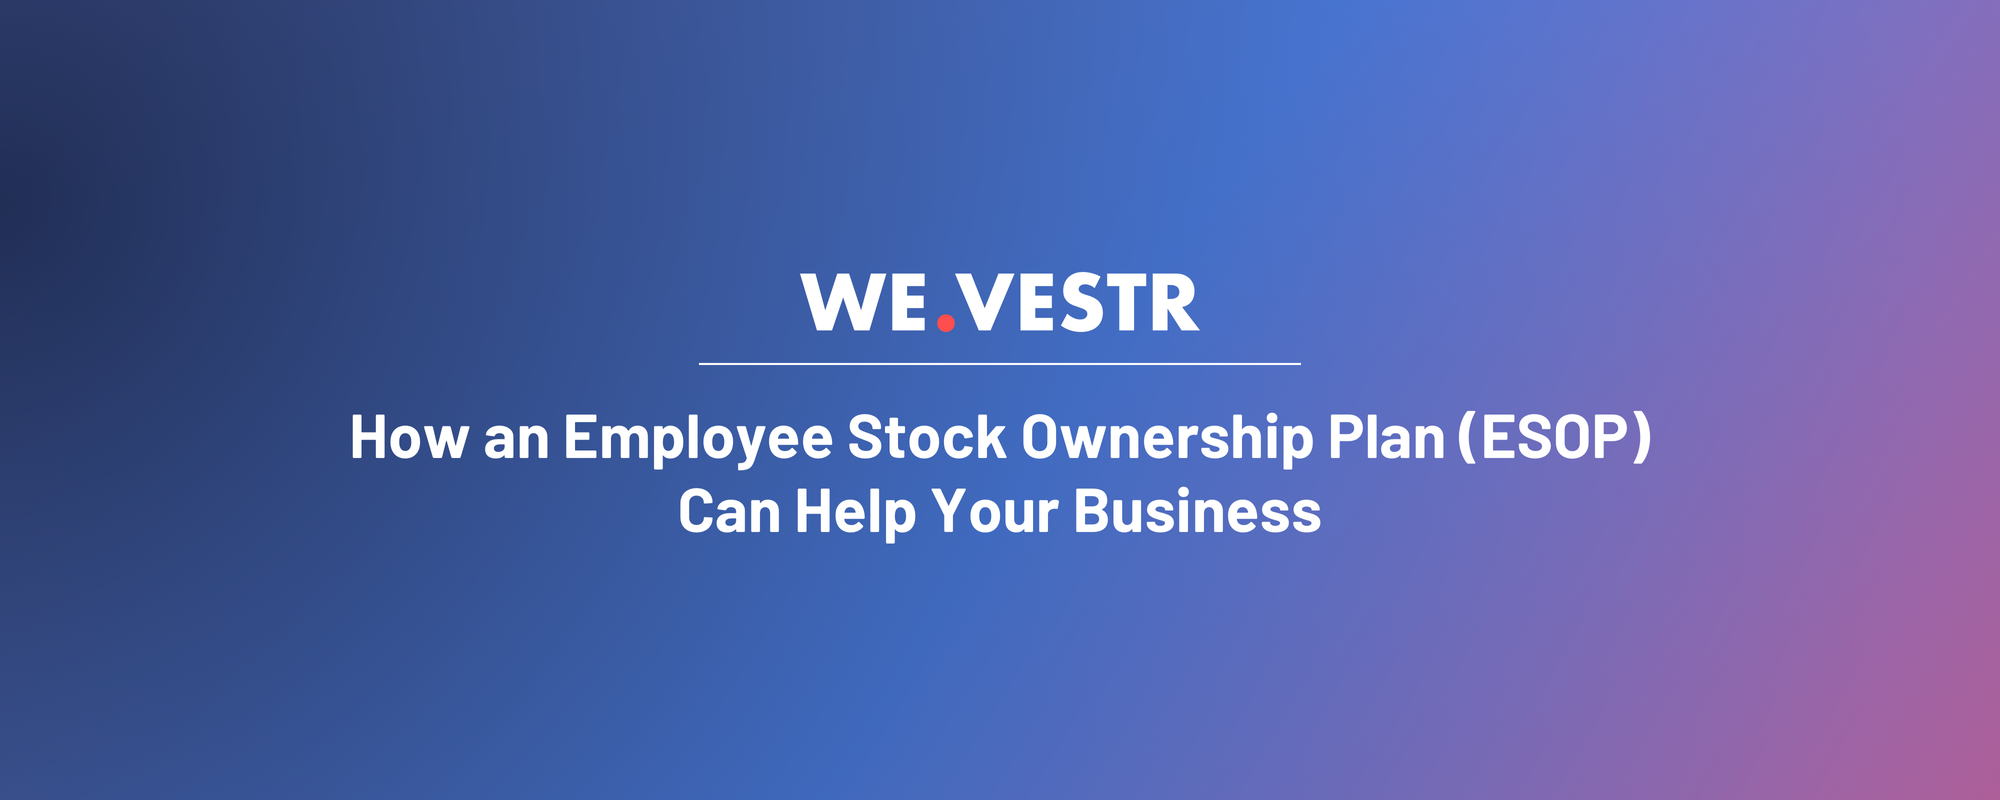 How an Employee Stock Ownership Plan (ESOP) Can Help Your Business